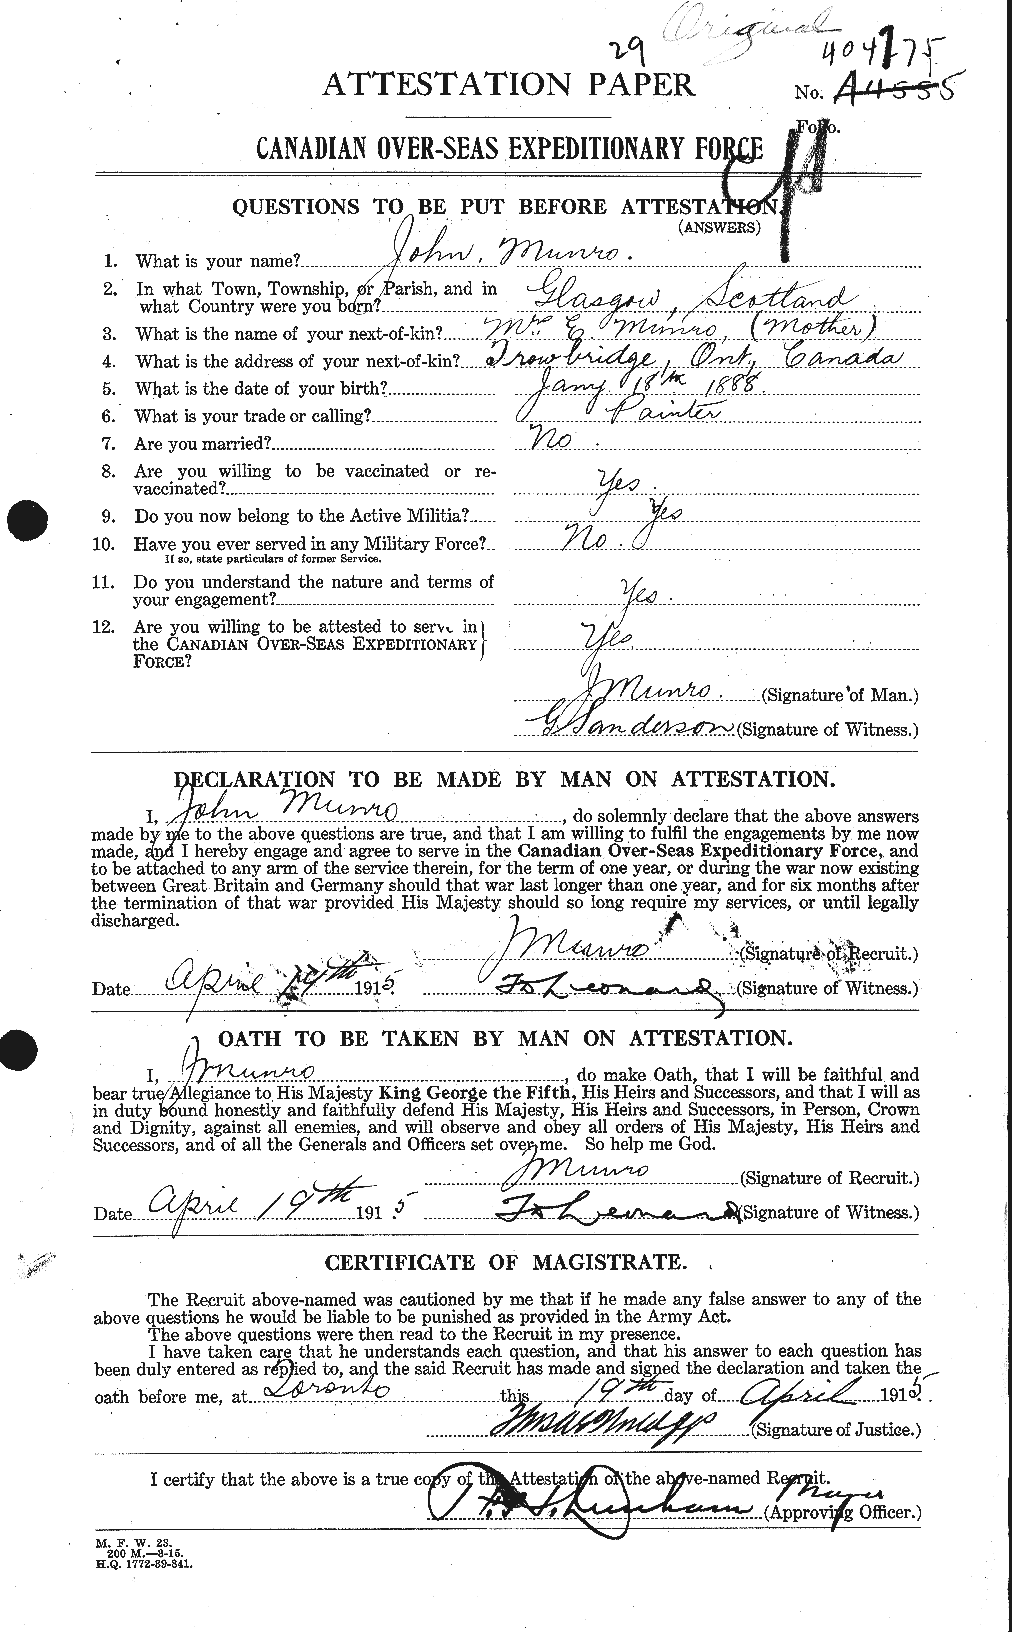 Personnel Records of the First World War - CEF 513947a